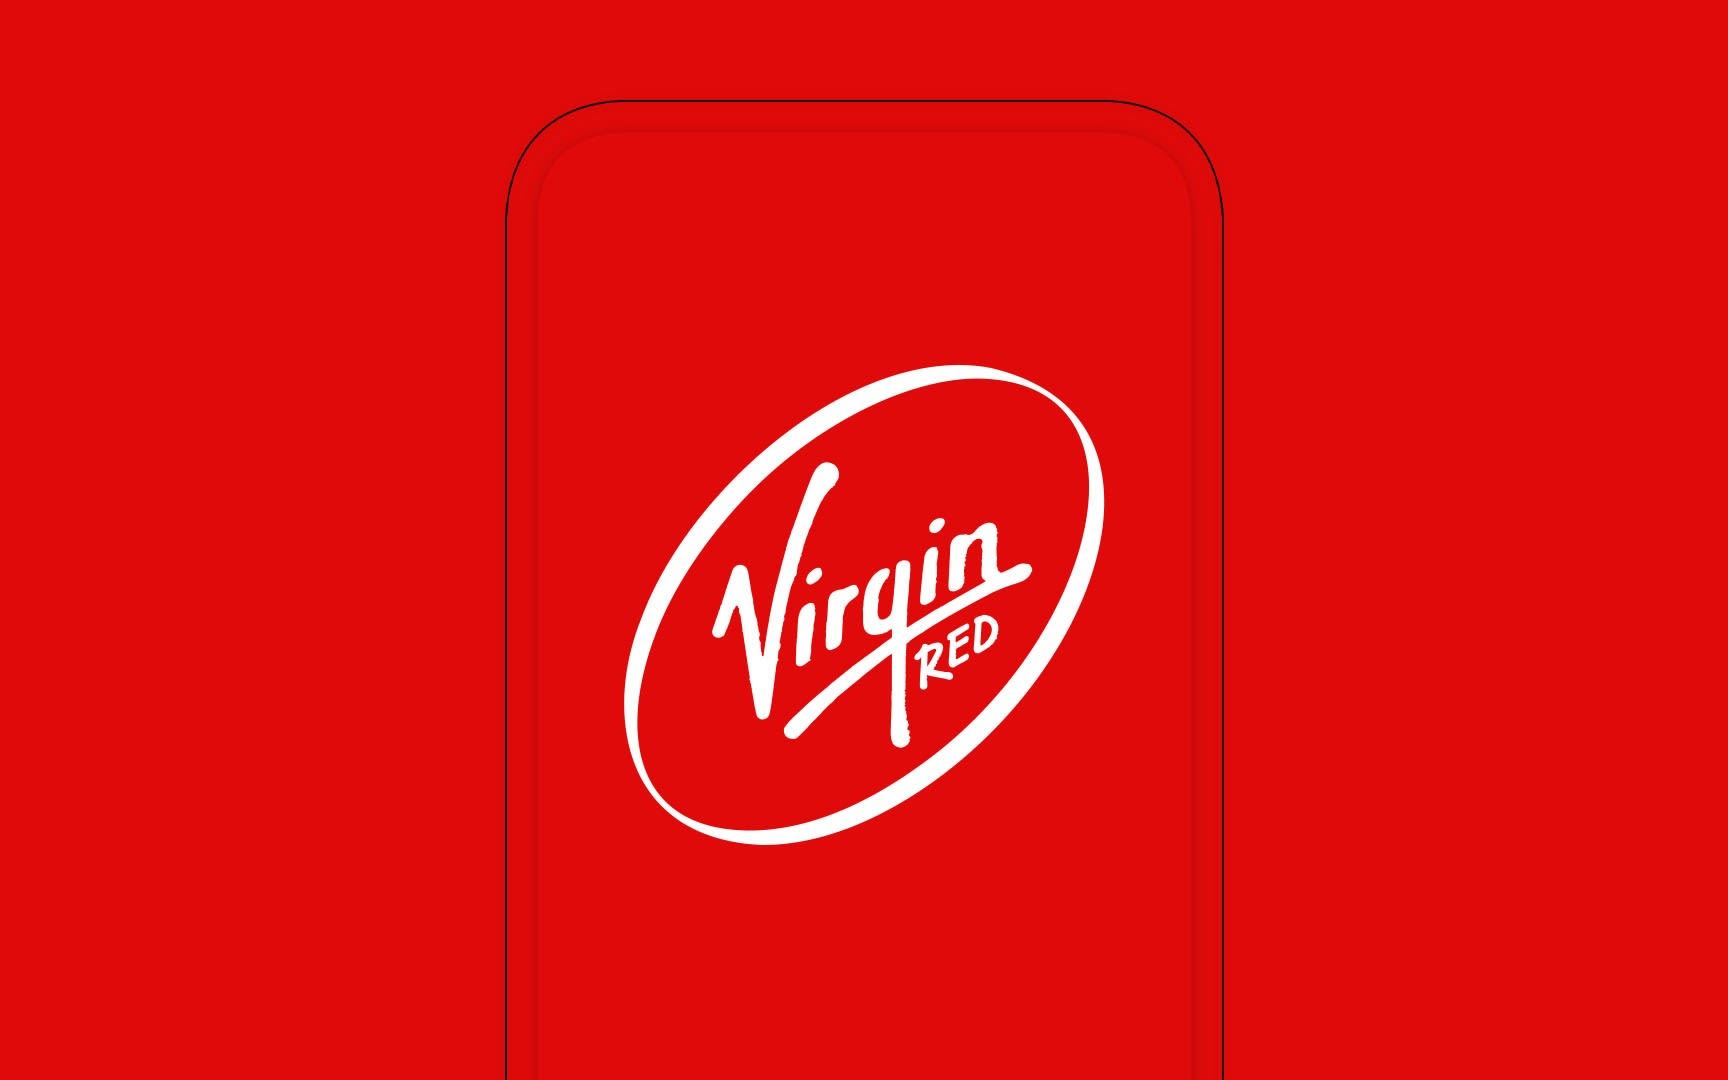 Image of Virgin Red app on a phone screen.